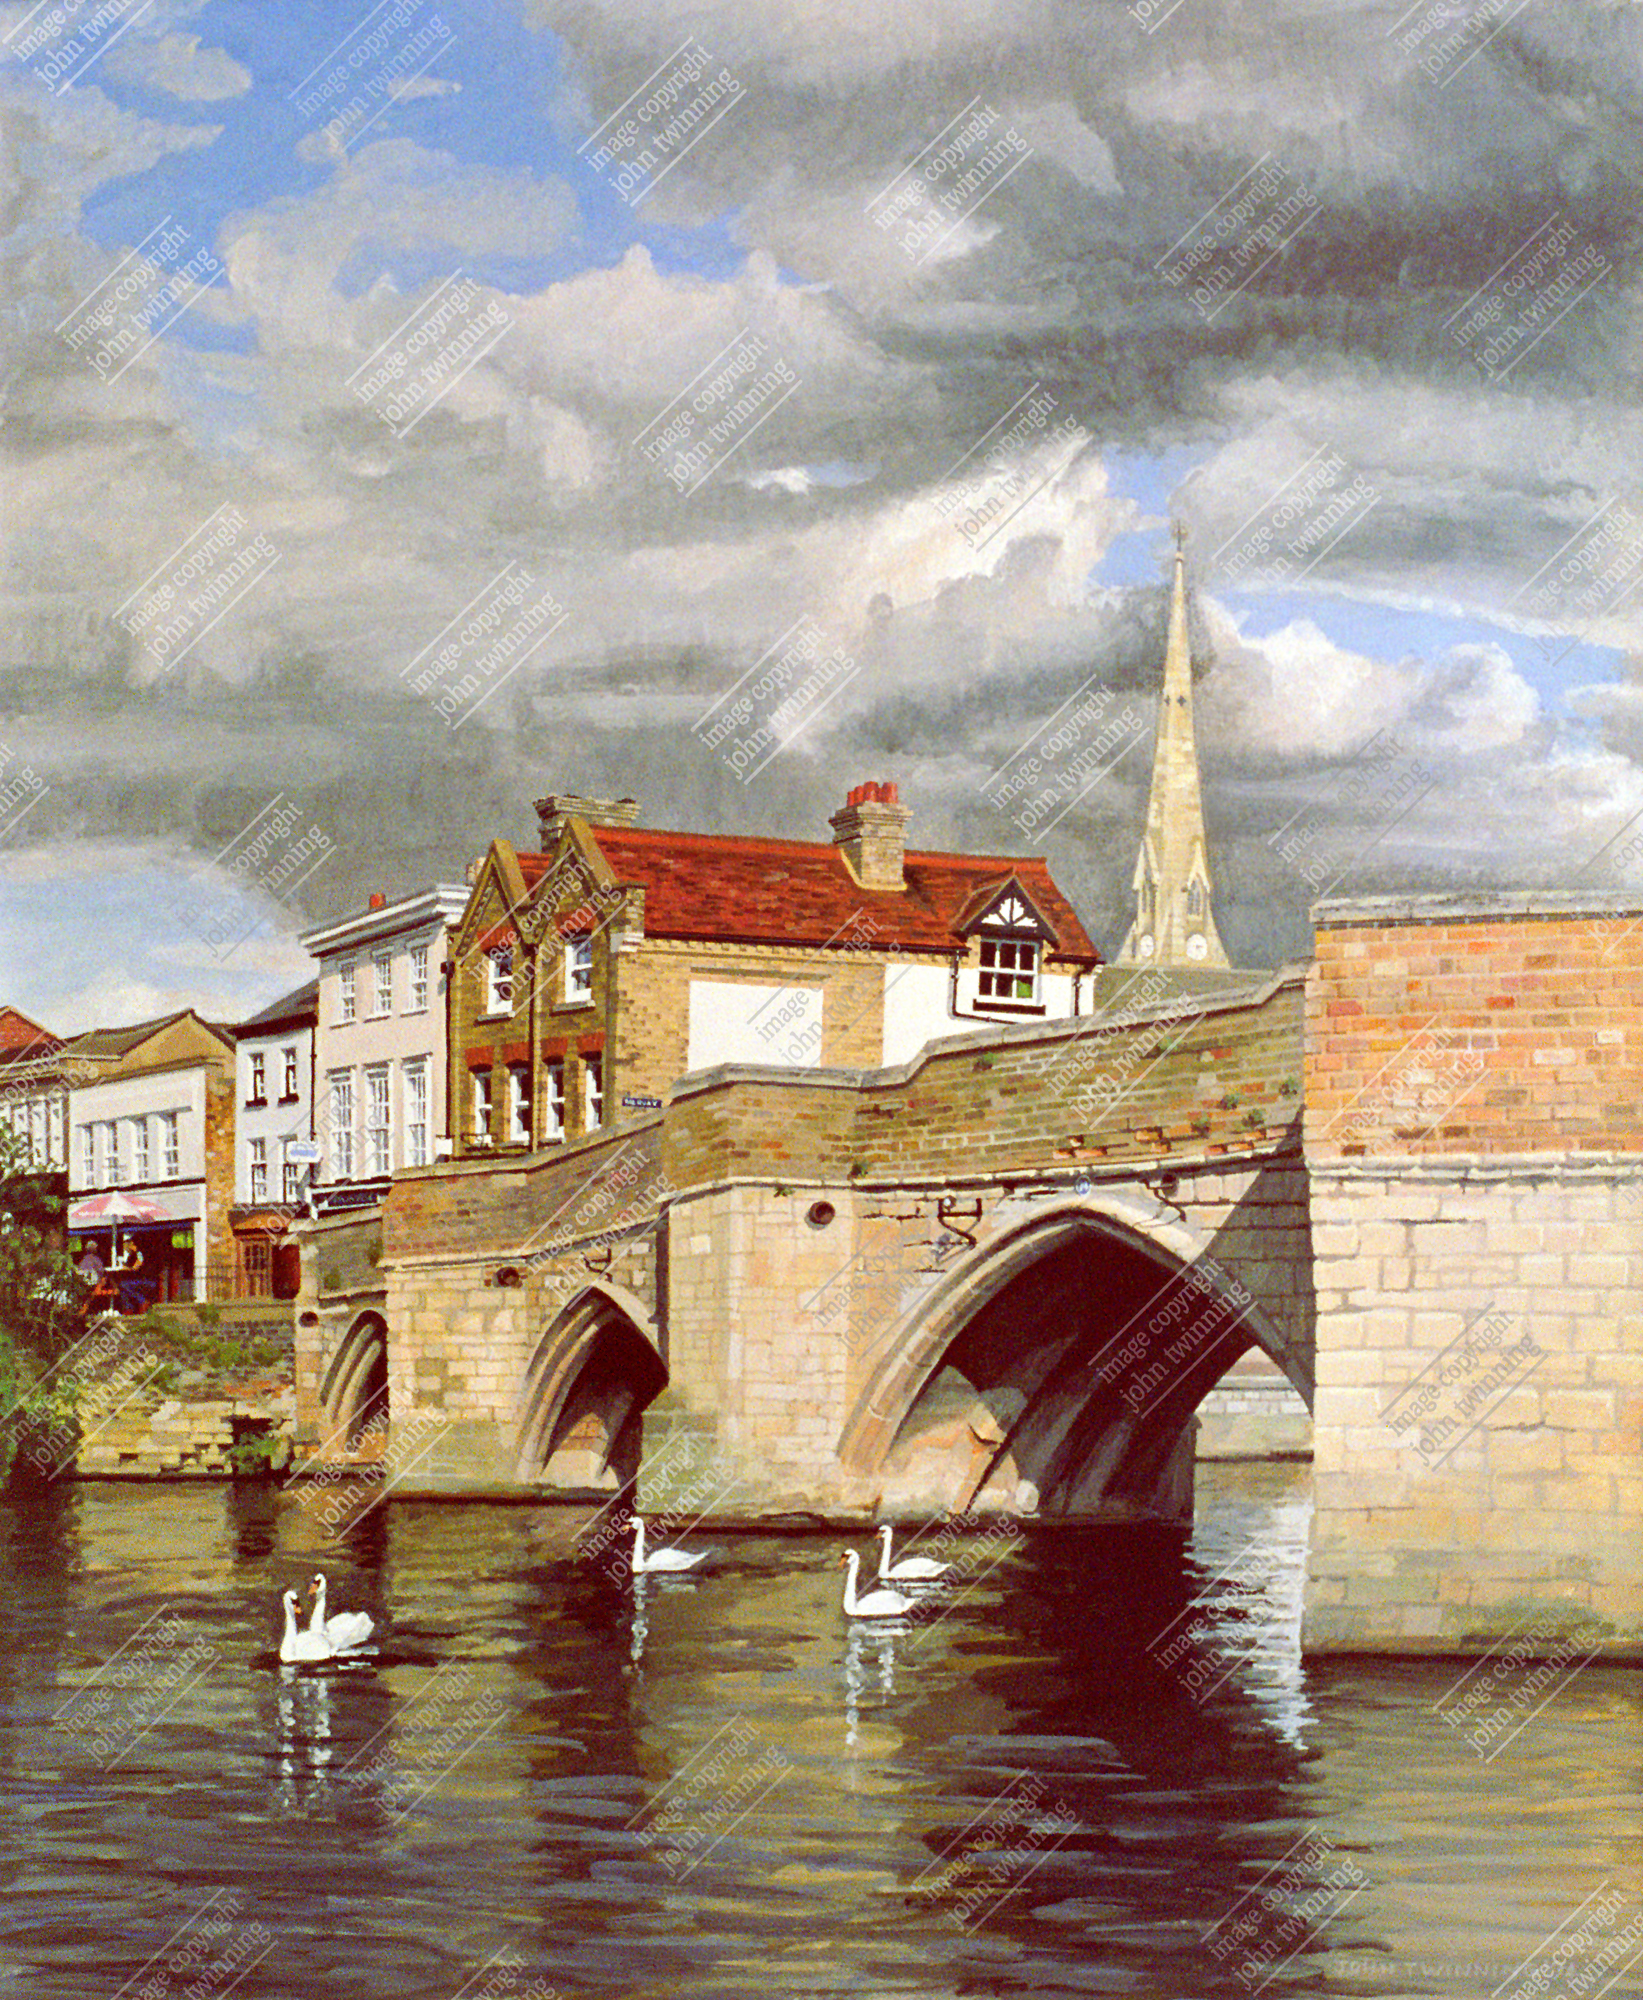 ‘The Bridge And Swans, St. Ives’ – art print from a watercolour painting of this town’s bridge over the great ouse